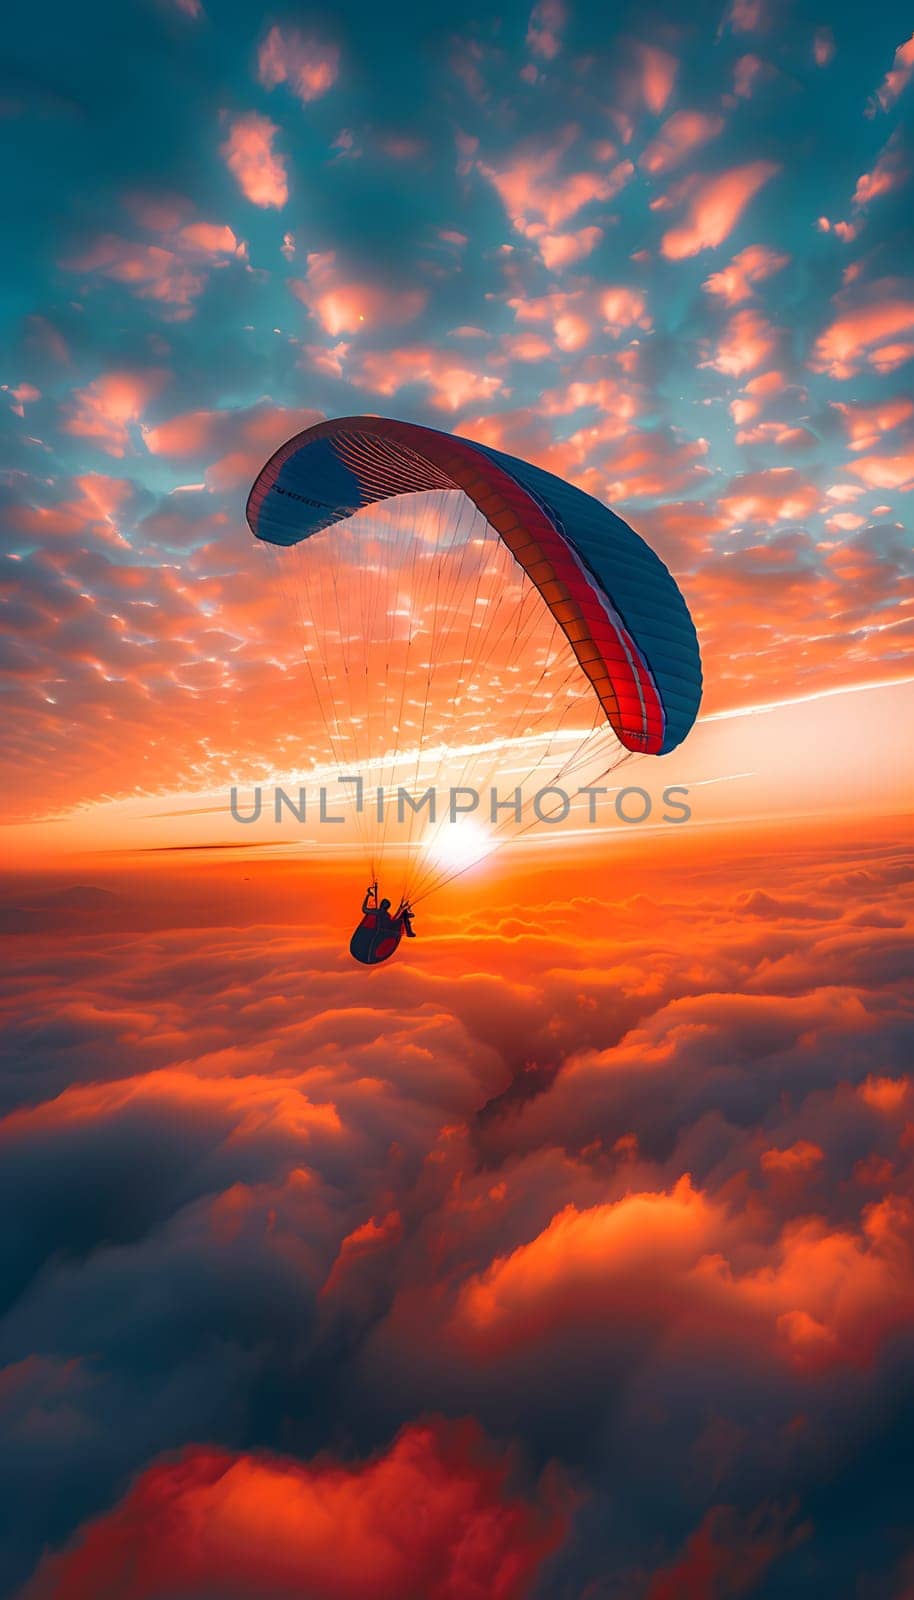 A person is gliding on a parachute above fluffy cumulus clouds at sunset, surrounded by the orange hues of the afterglow in the dusk sky